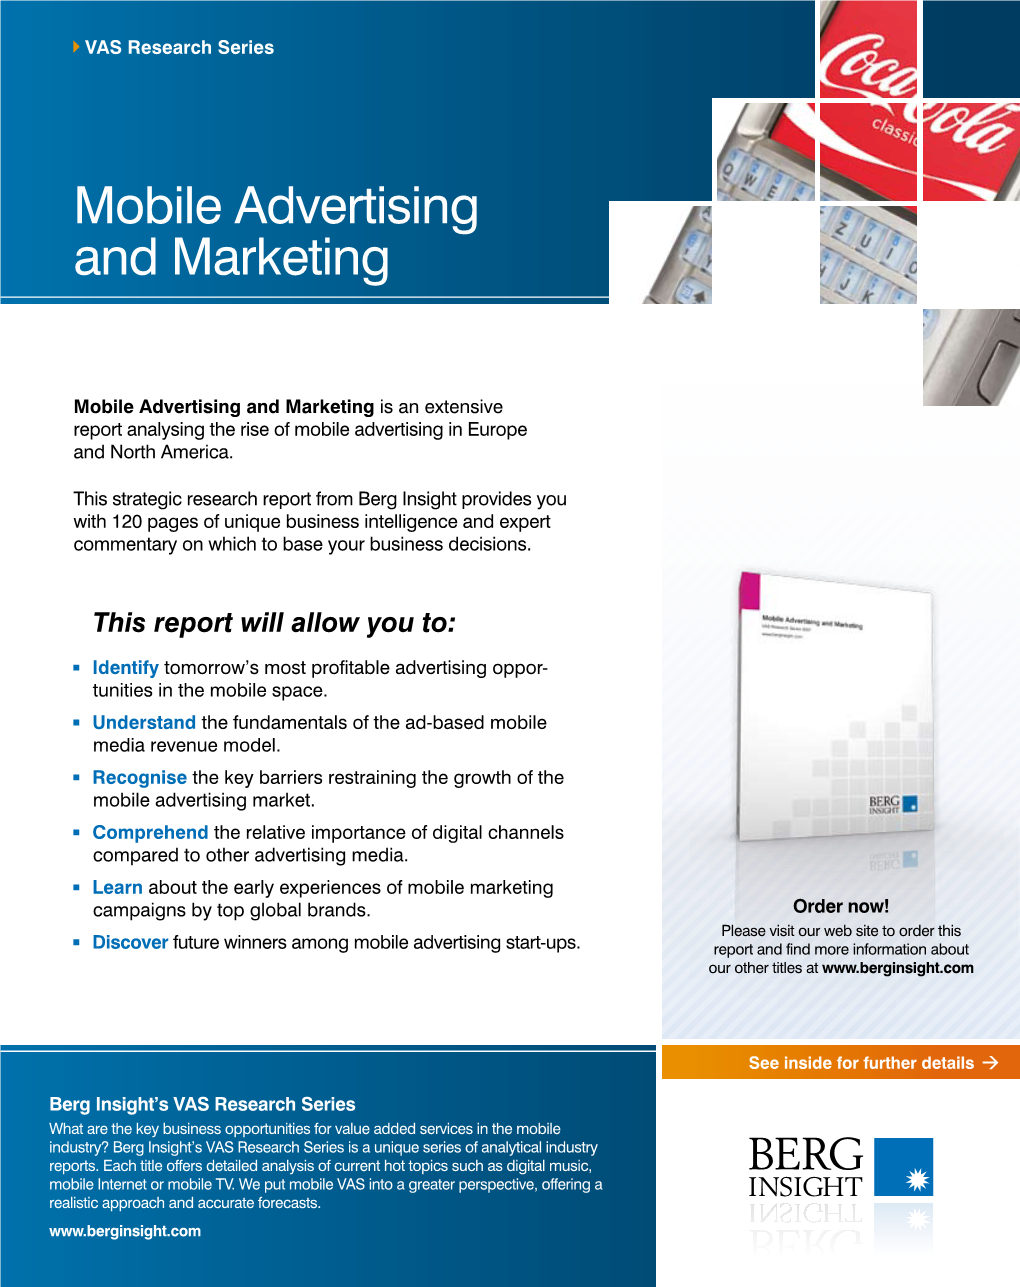 Mobile Advertising and Marketing